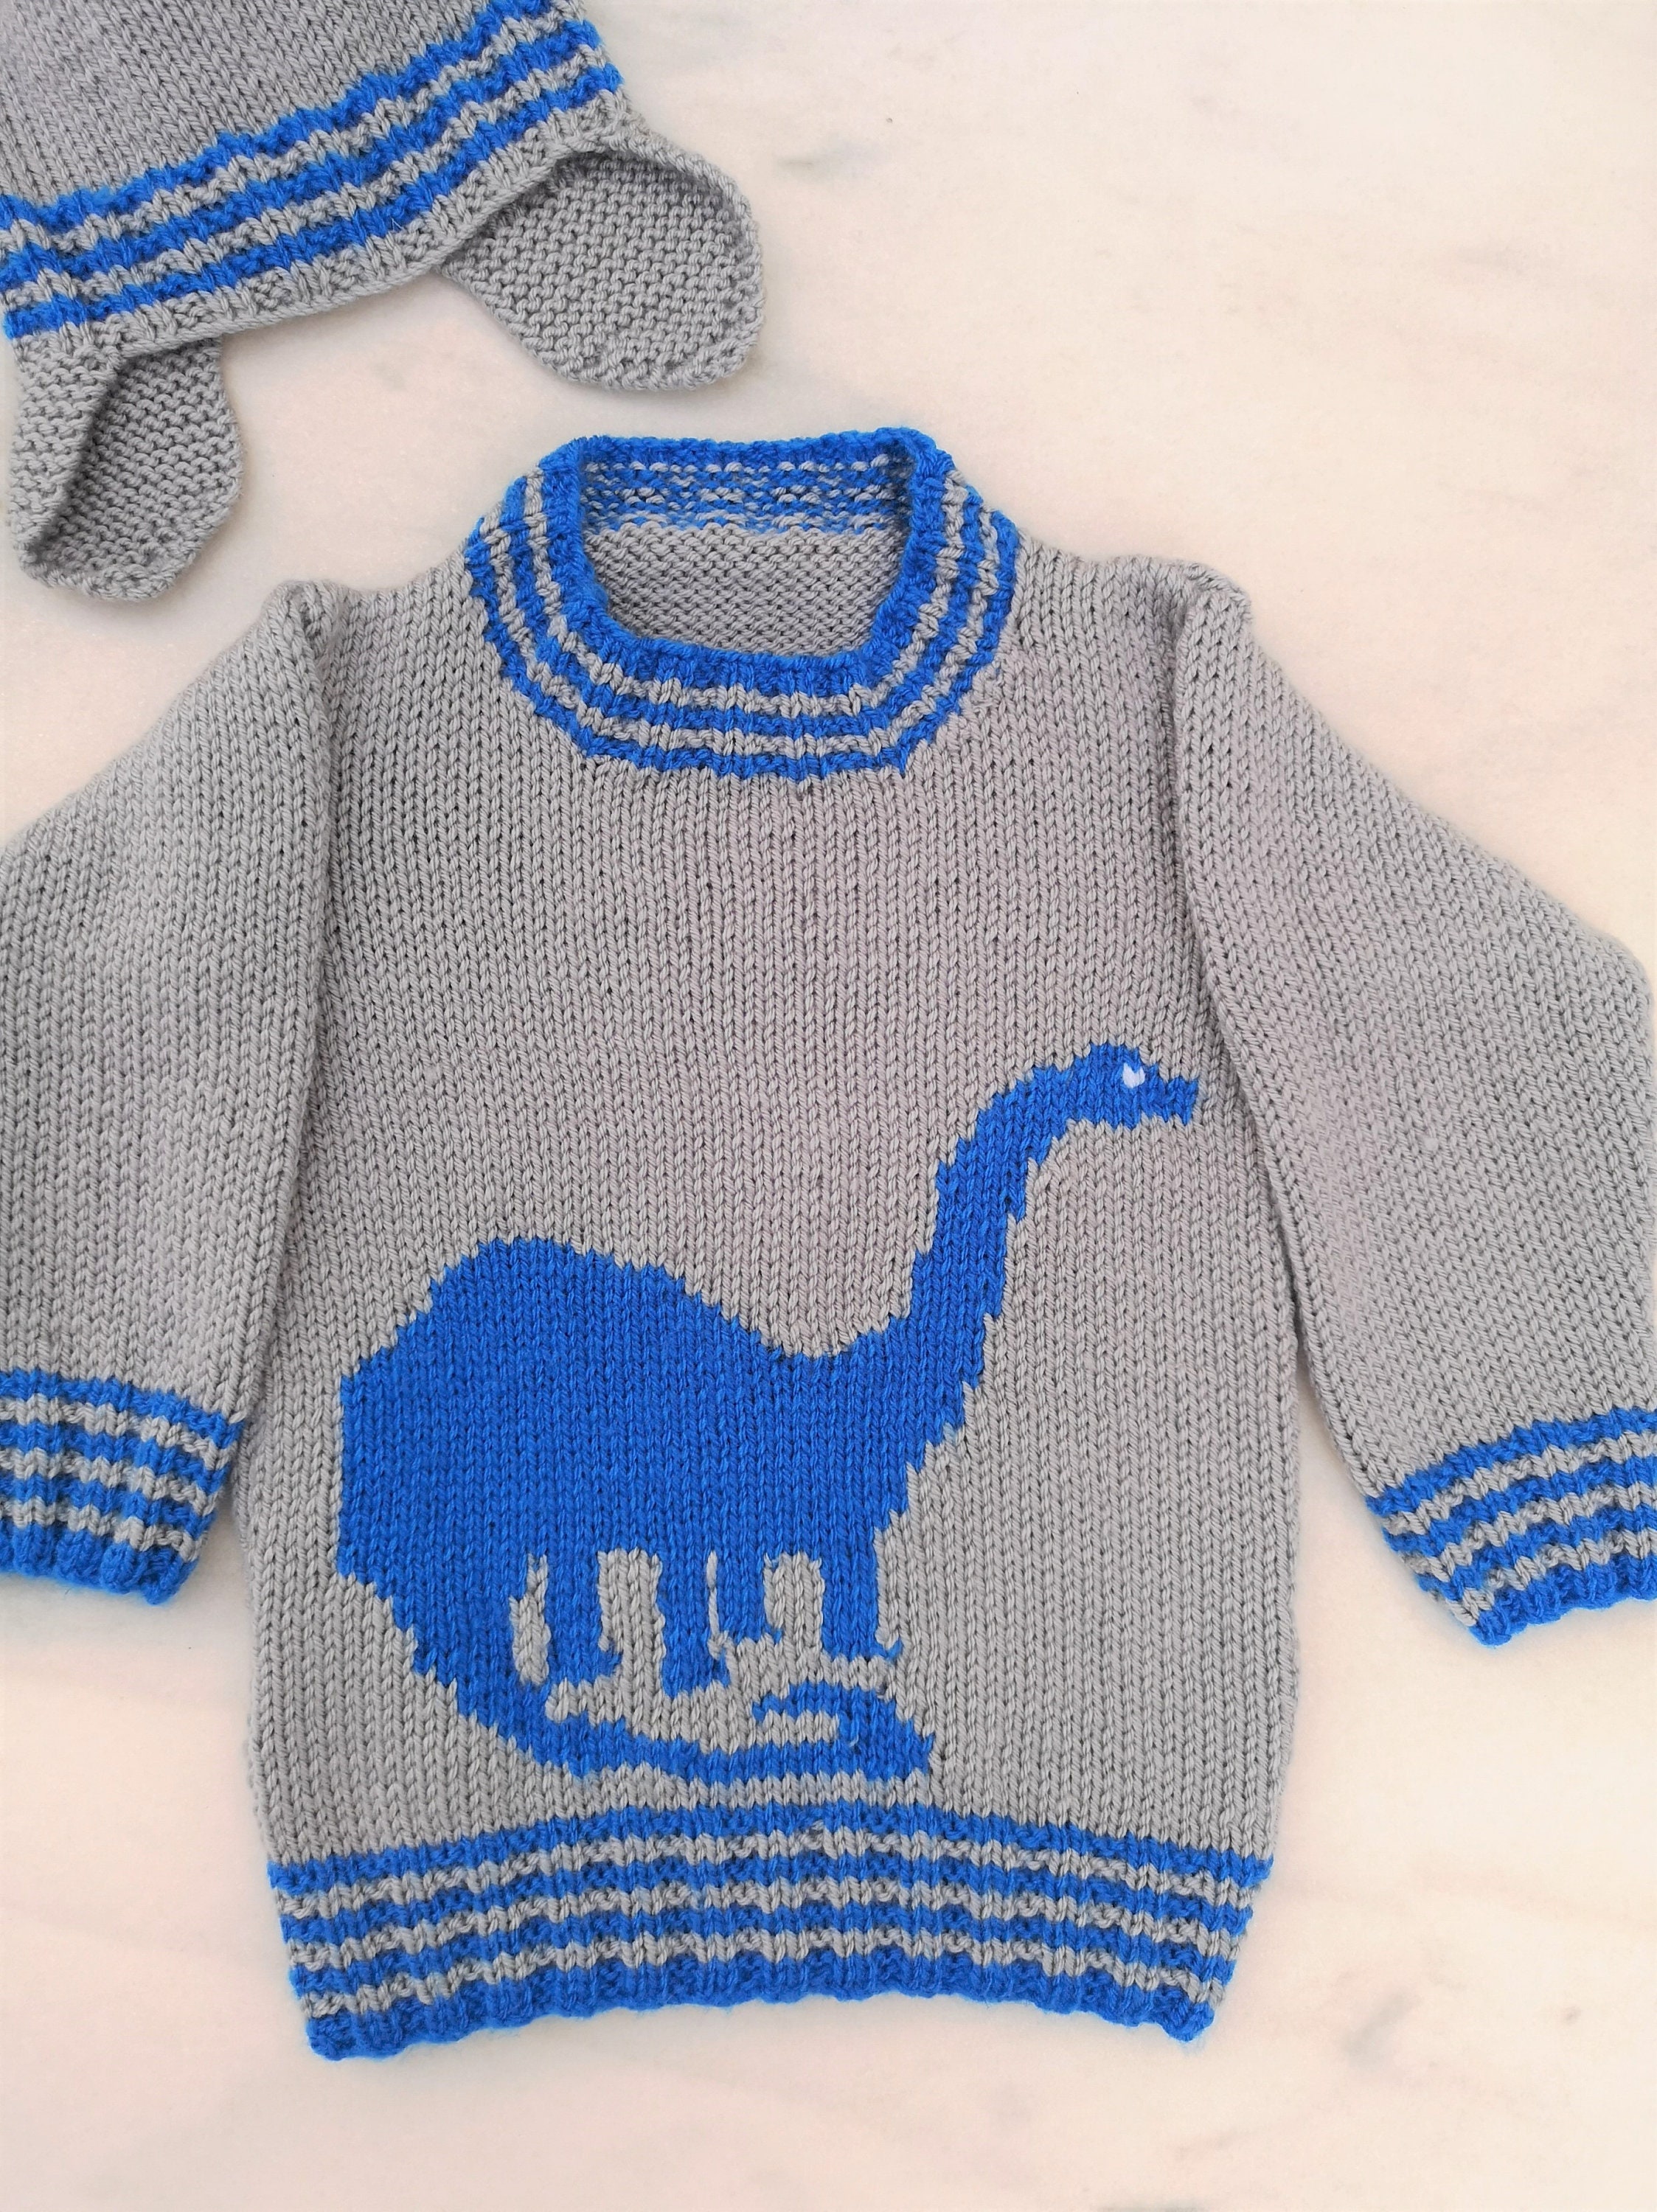 Knitting Pattern for Dinosaur Child's Sweater and Hat